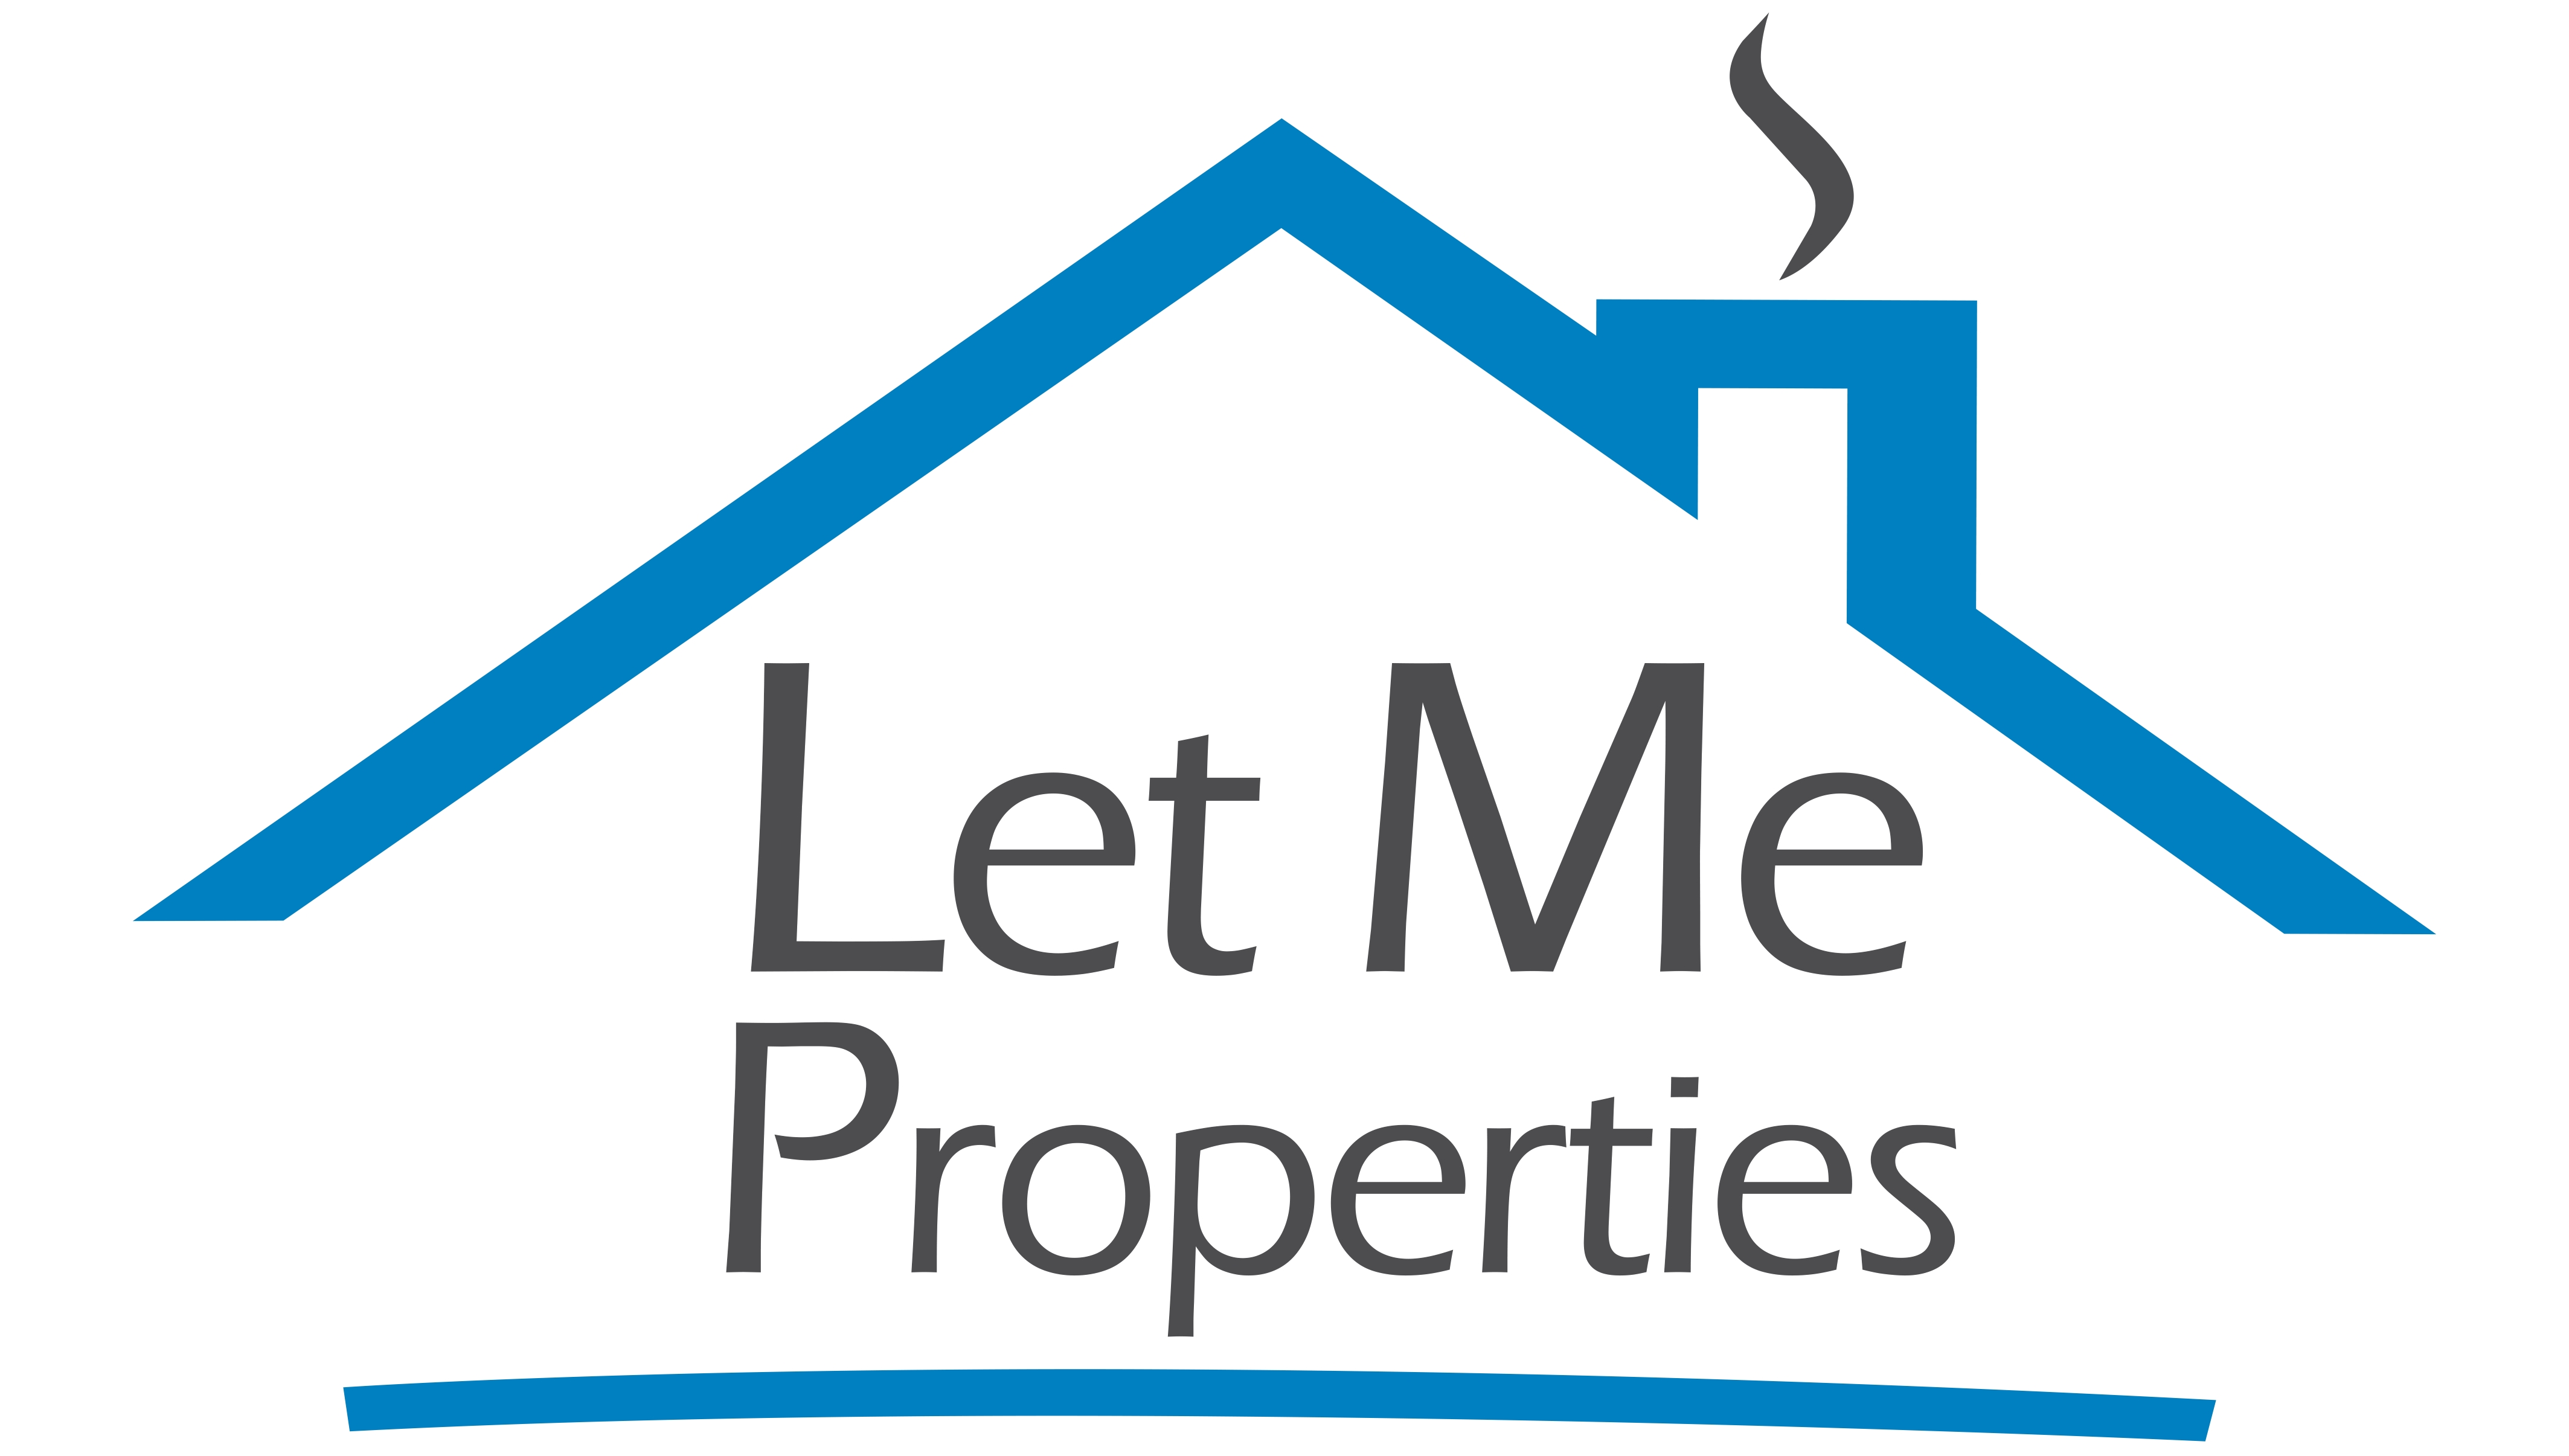 Let Me Properties : Letting agents in Welwyn Garden City Hertfordshire